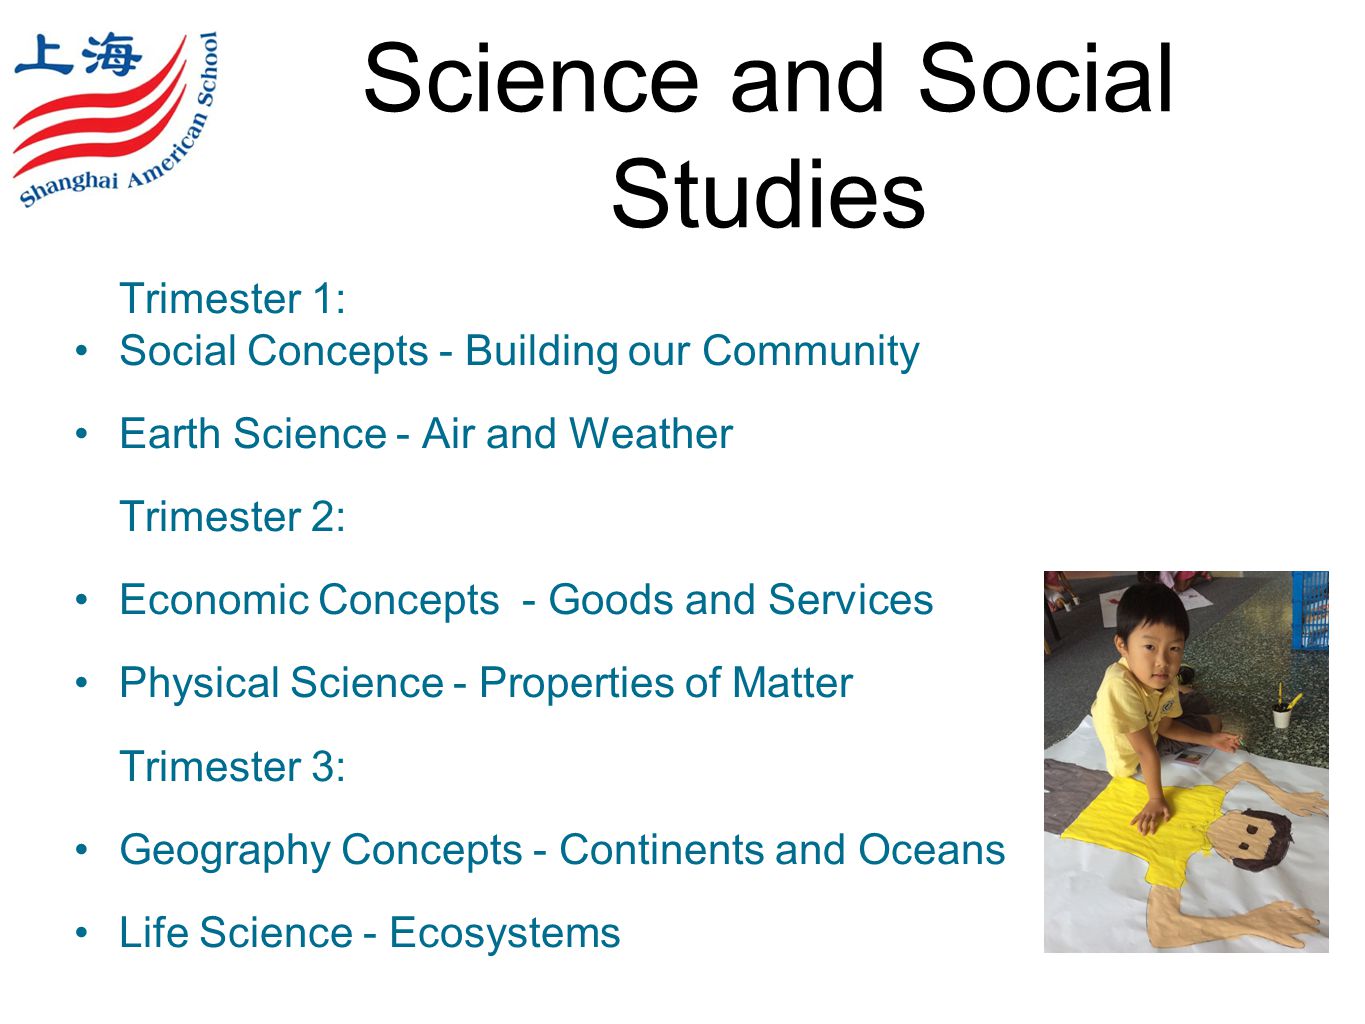 Science and Social Studies Trimester 1: Social Concepts - Building our Community Earth Science - Air and Weather Trimester 2: Economic Concepts - Goods and Services Physical Science - Properties of Matter Trimester 3: Geography Concepts - Continents and Oceans Life Science - Ecosystems